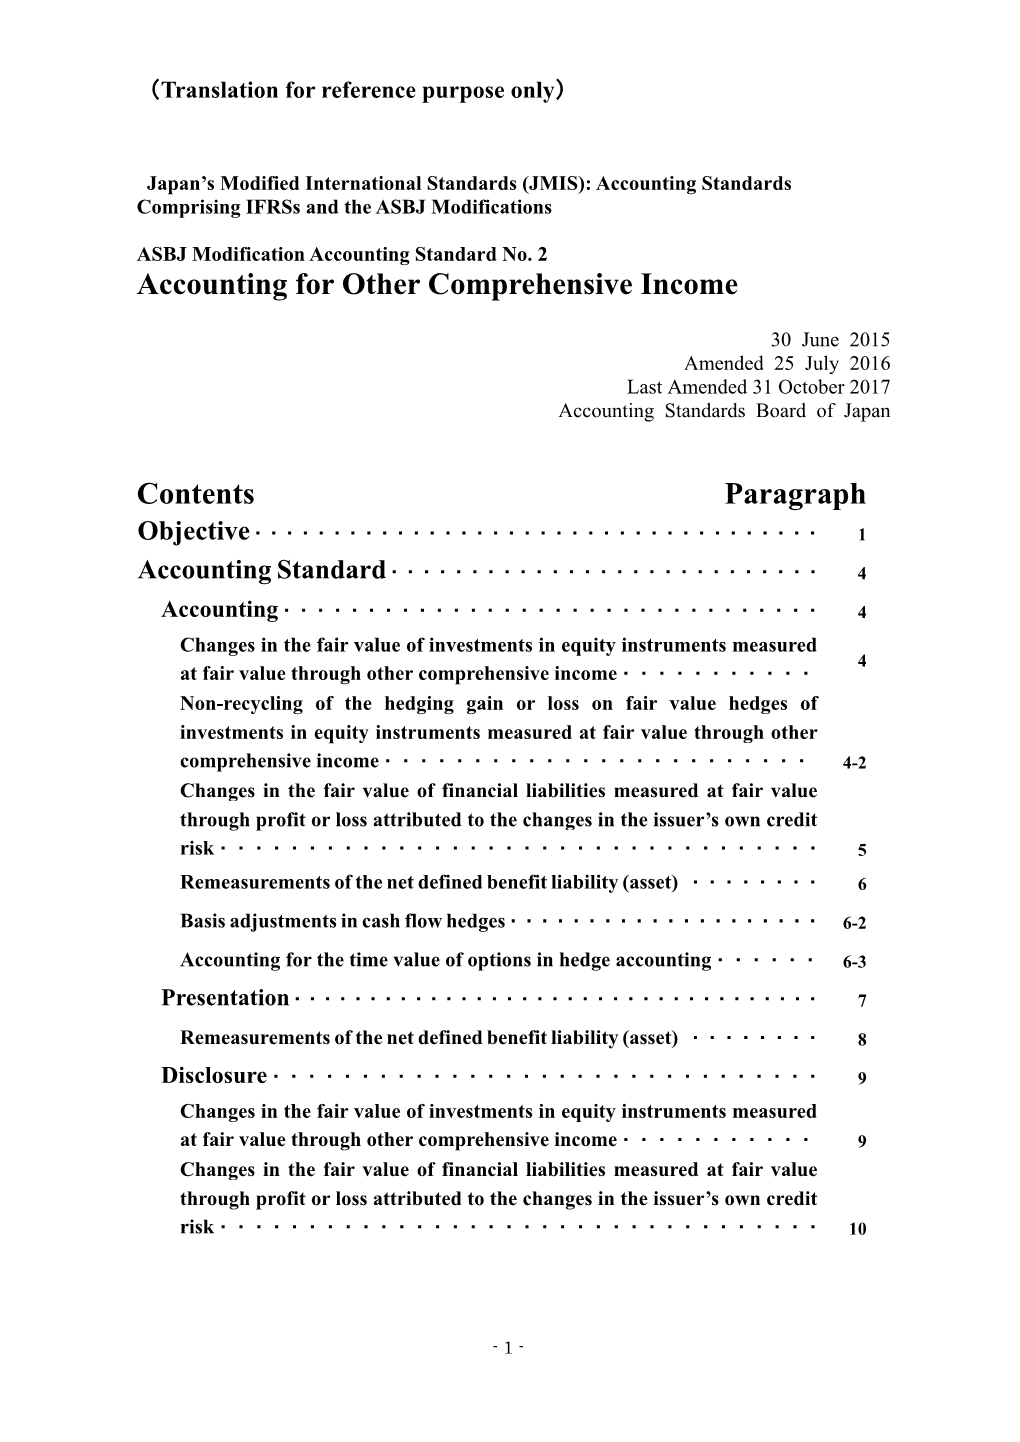 Accounting for Other Comprehensive Income Contents Paragraph